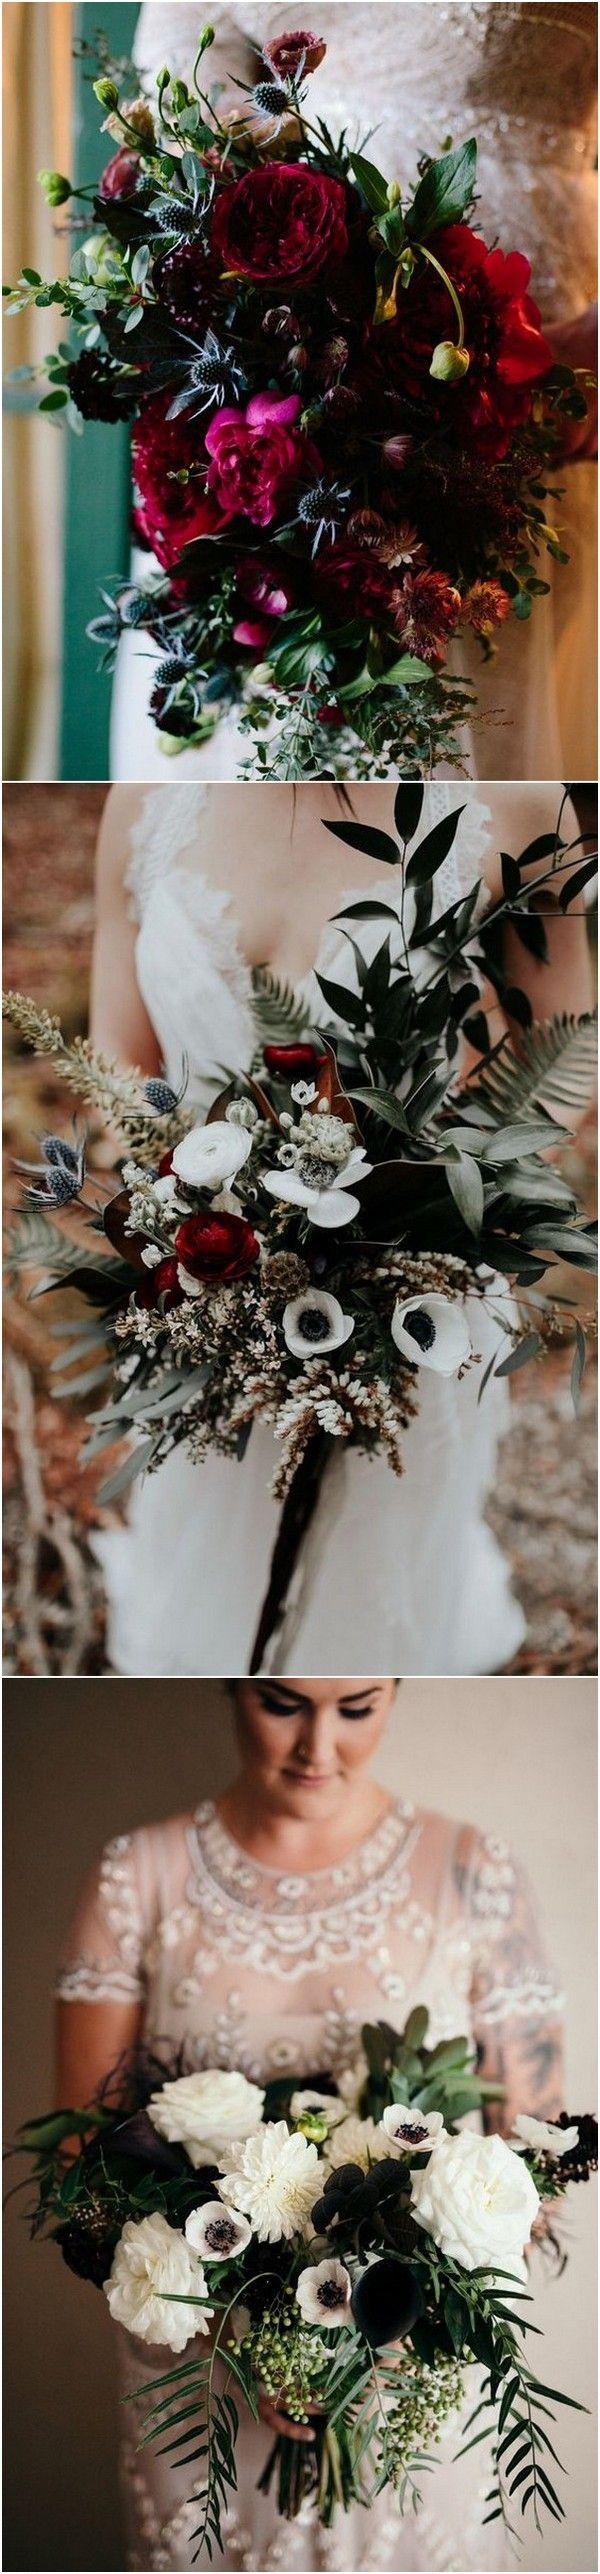 Hochzeit - Top 25 Moody Wedding Bouquets For 2018 Trends - Page 2 Of 3